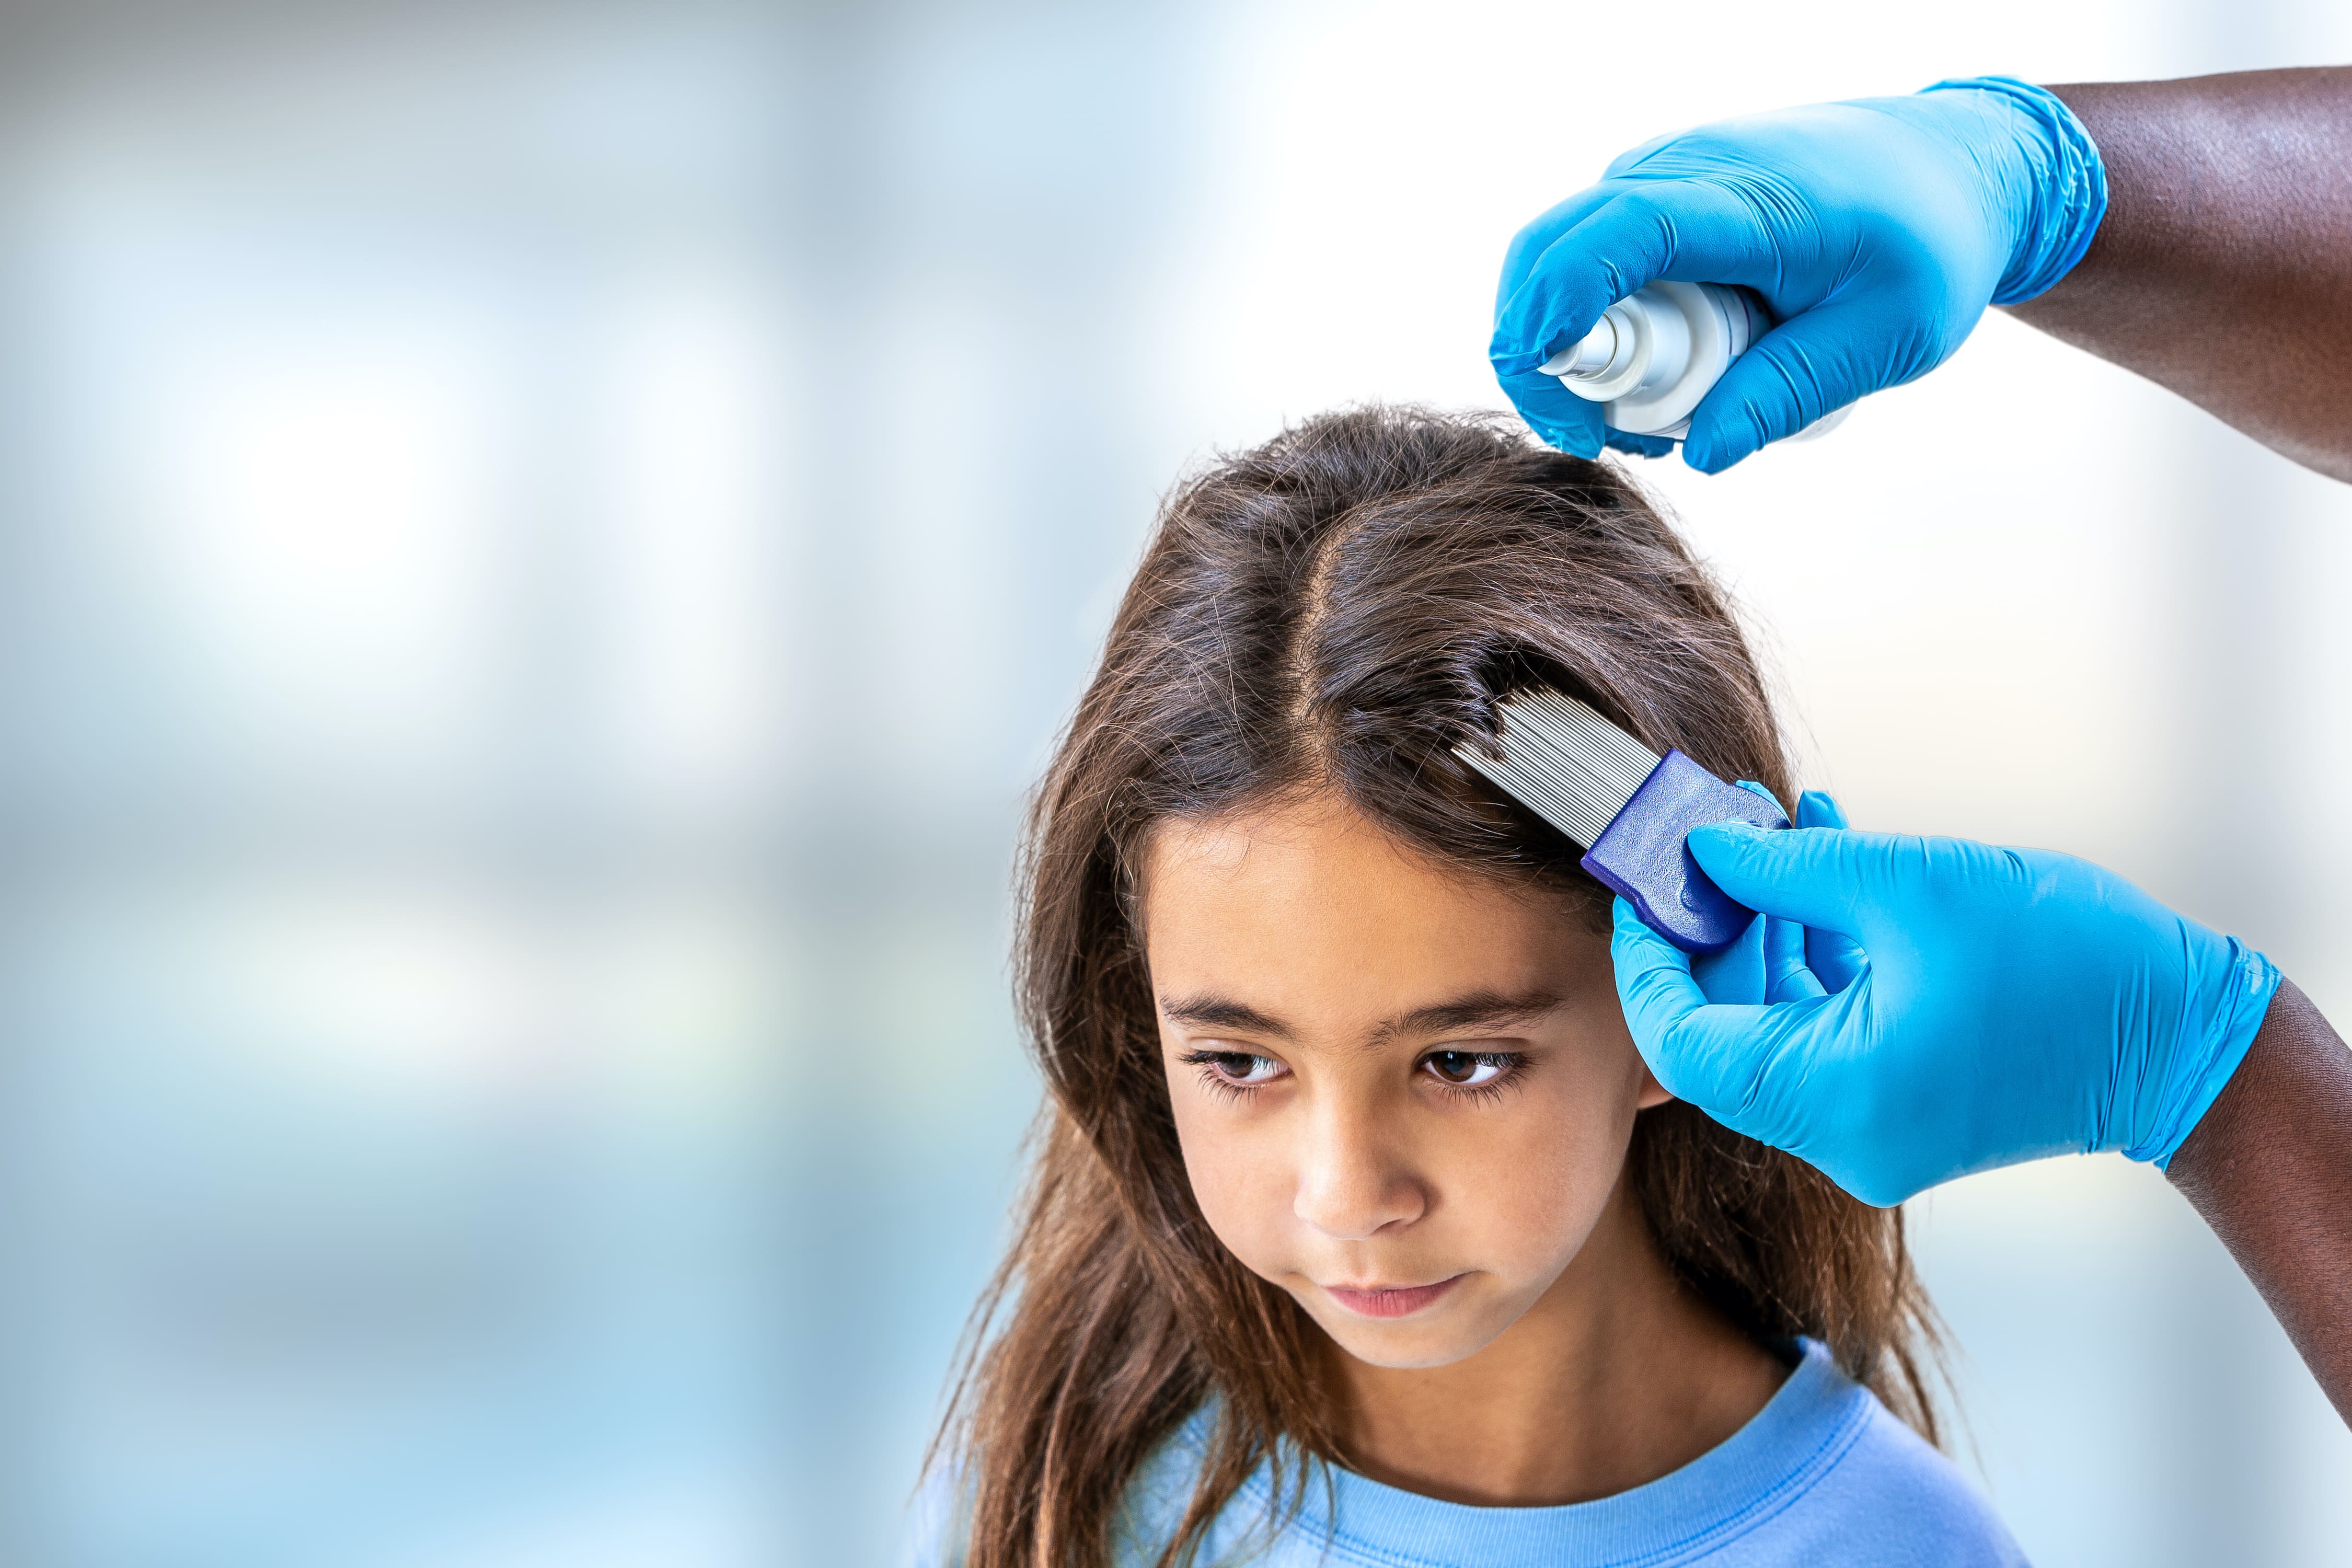 Video: How to treat head lice